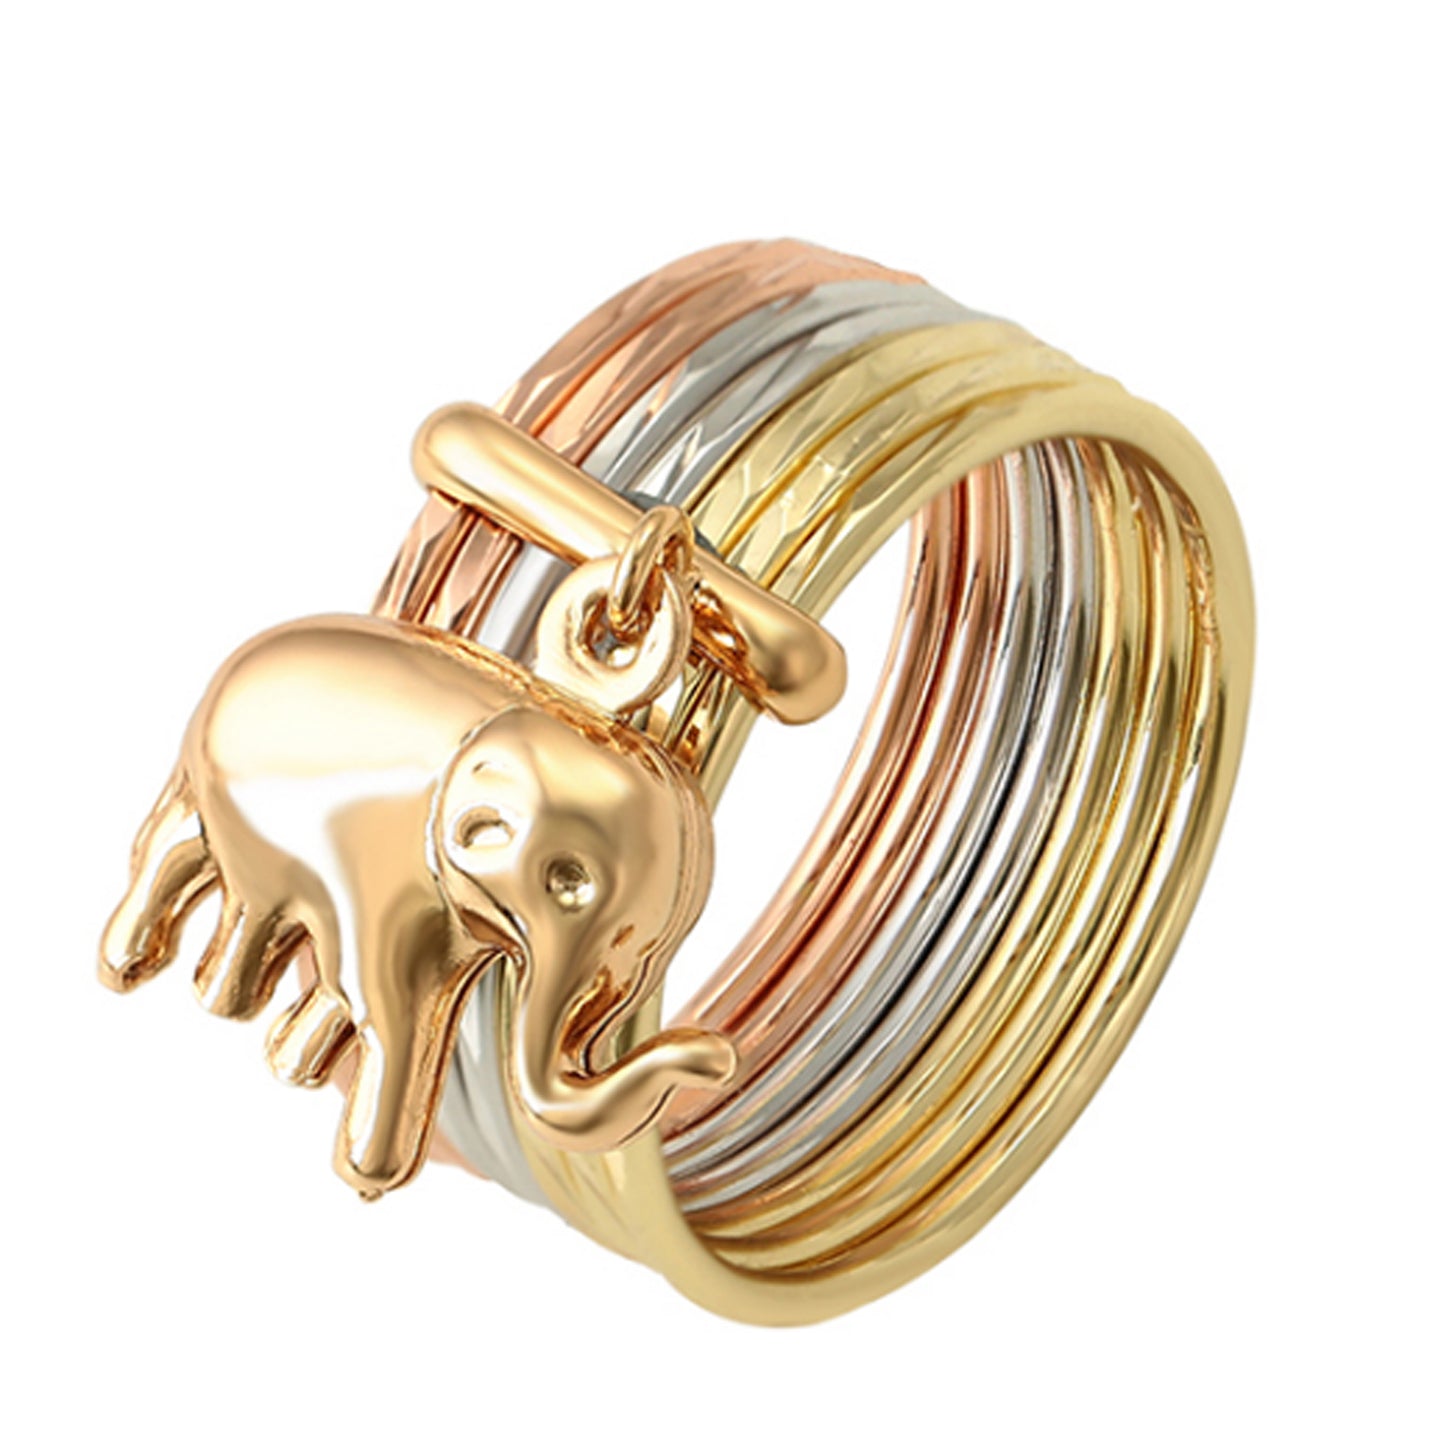 Rings - Tri Color Gold Plated. Elephant Semanario Rings.